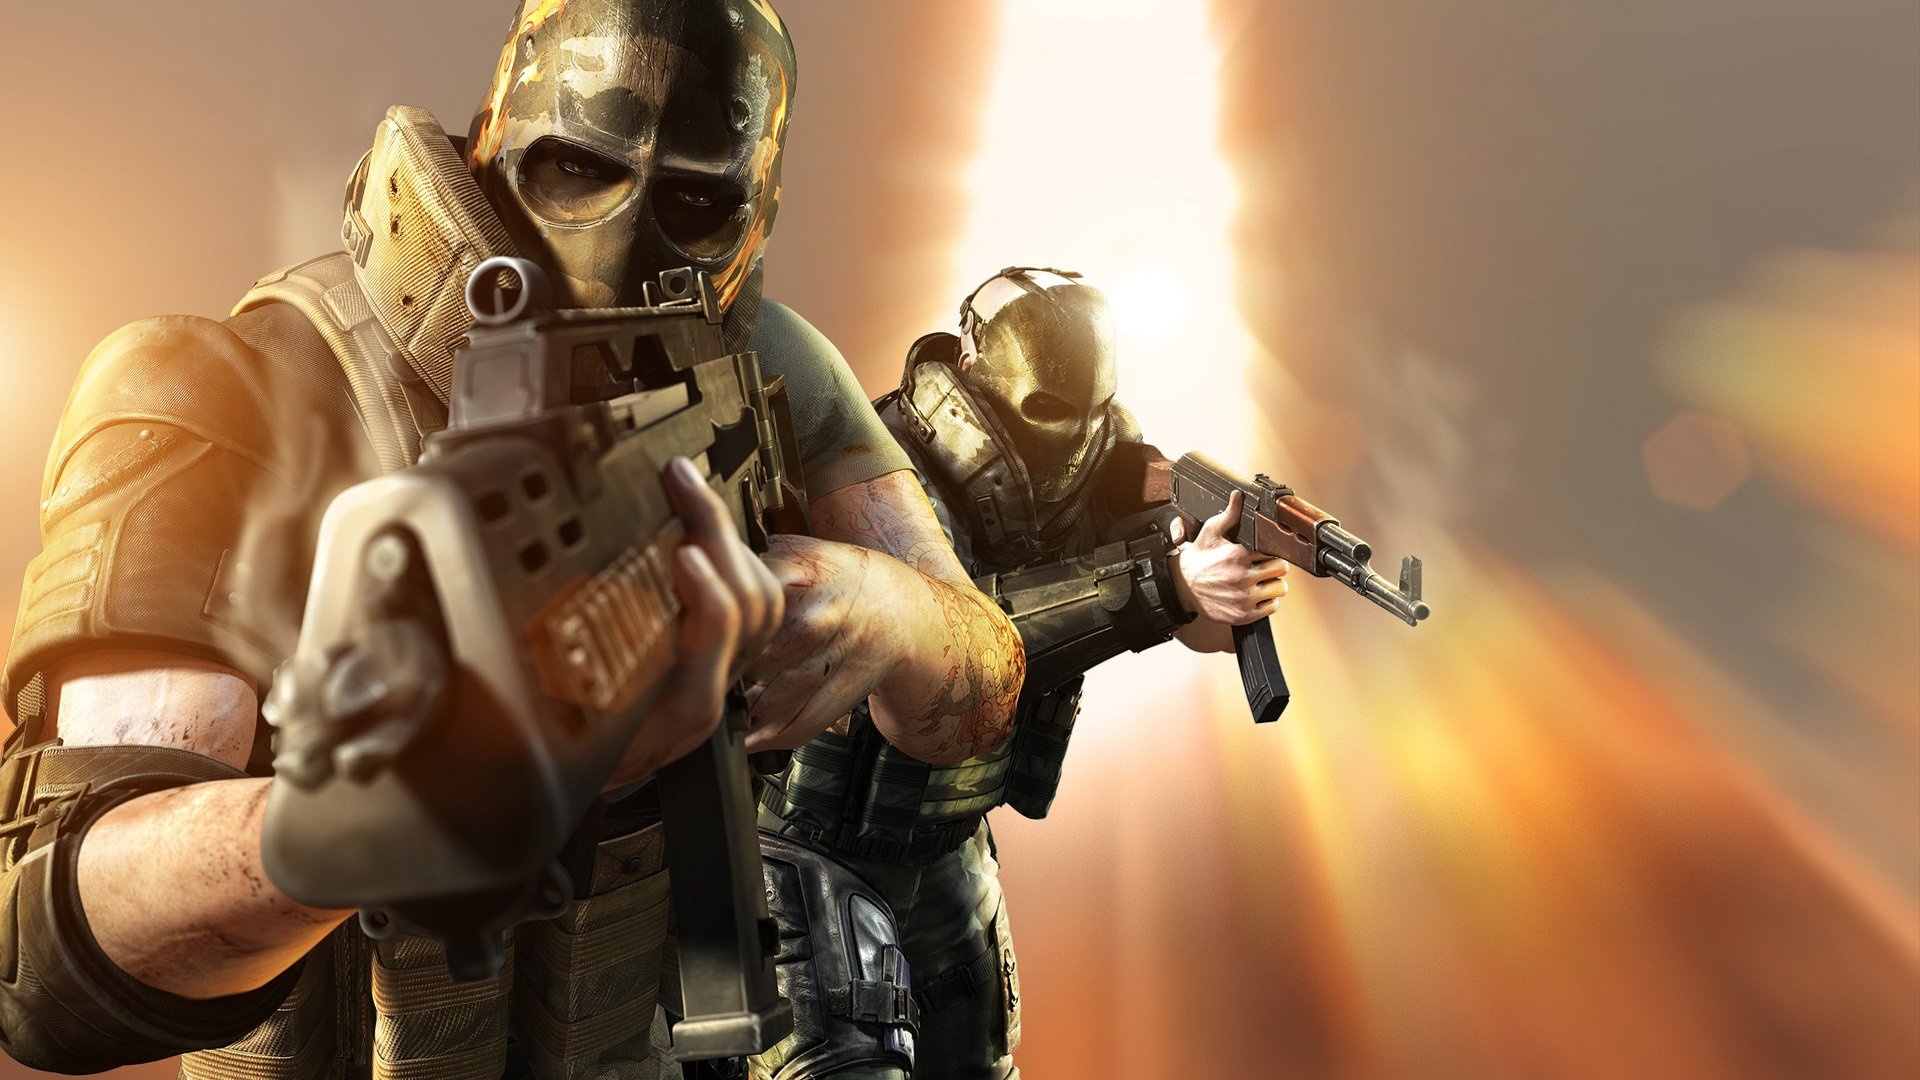 Army of Two, Action-packed shooter, HD wallpapers, Video games, 1920x1080 Full HD Desktop